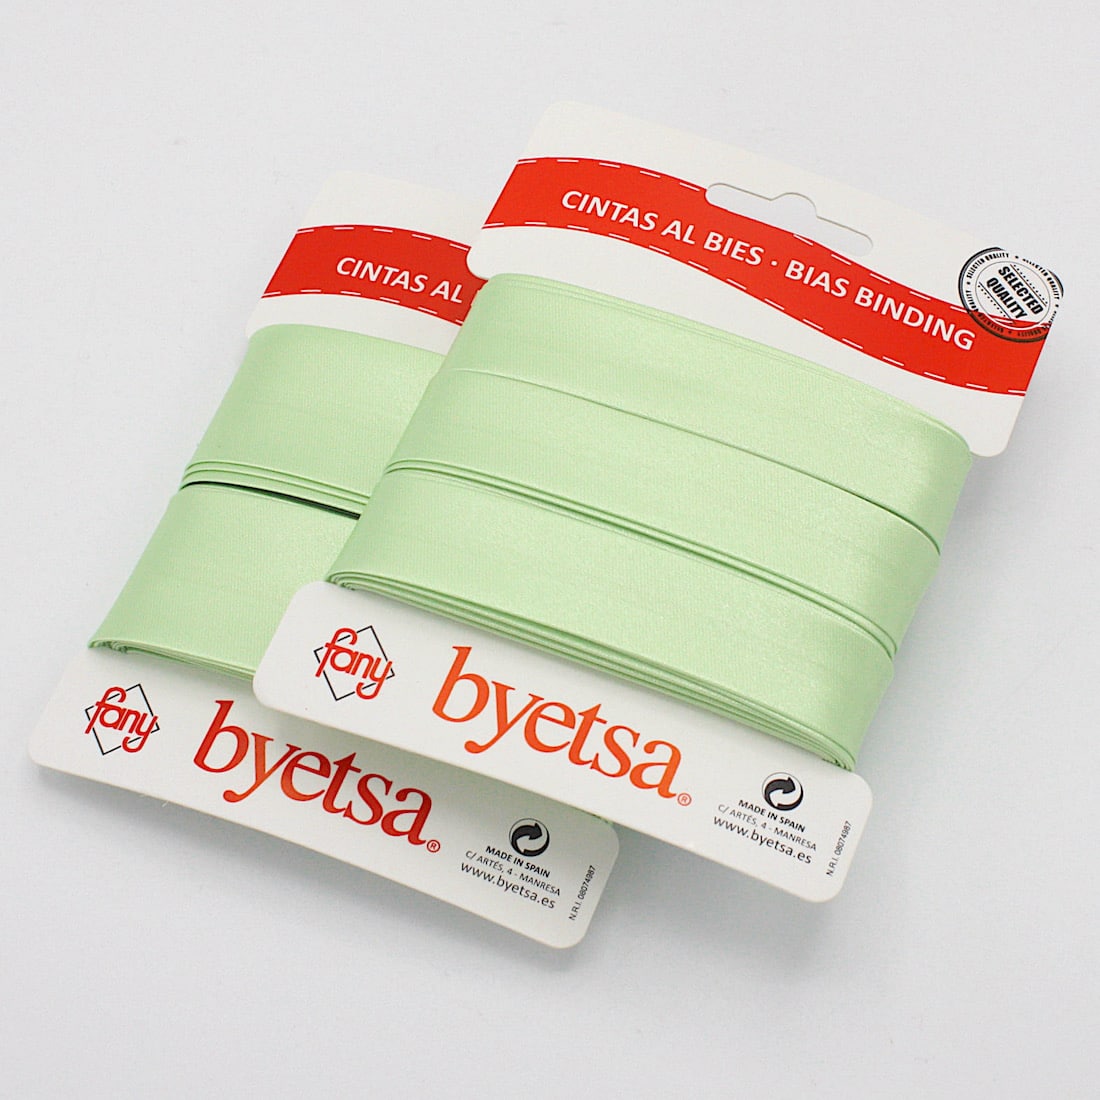 5 metres of Pre-packed Satin Bias Binding Tape in 18mm and 30mm width in Pastel Green 89